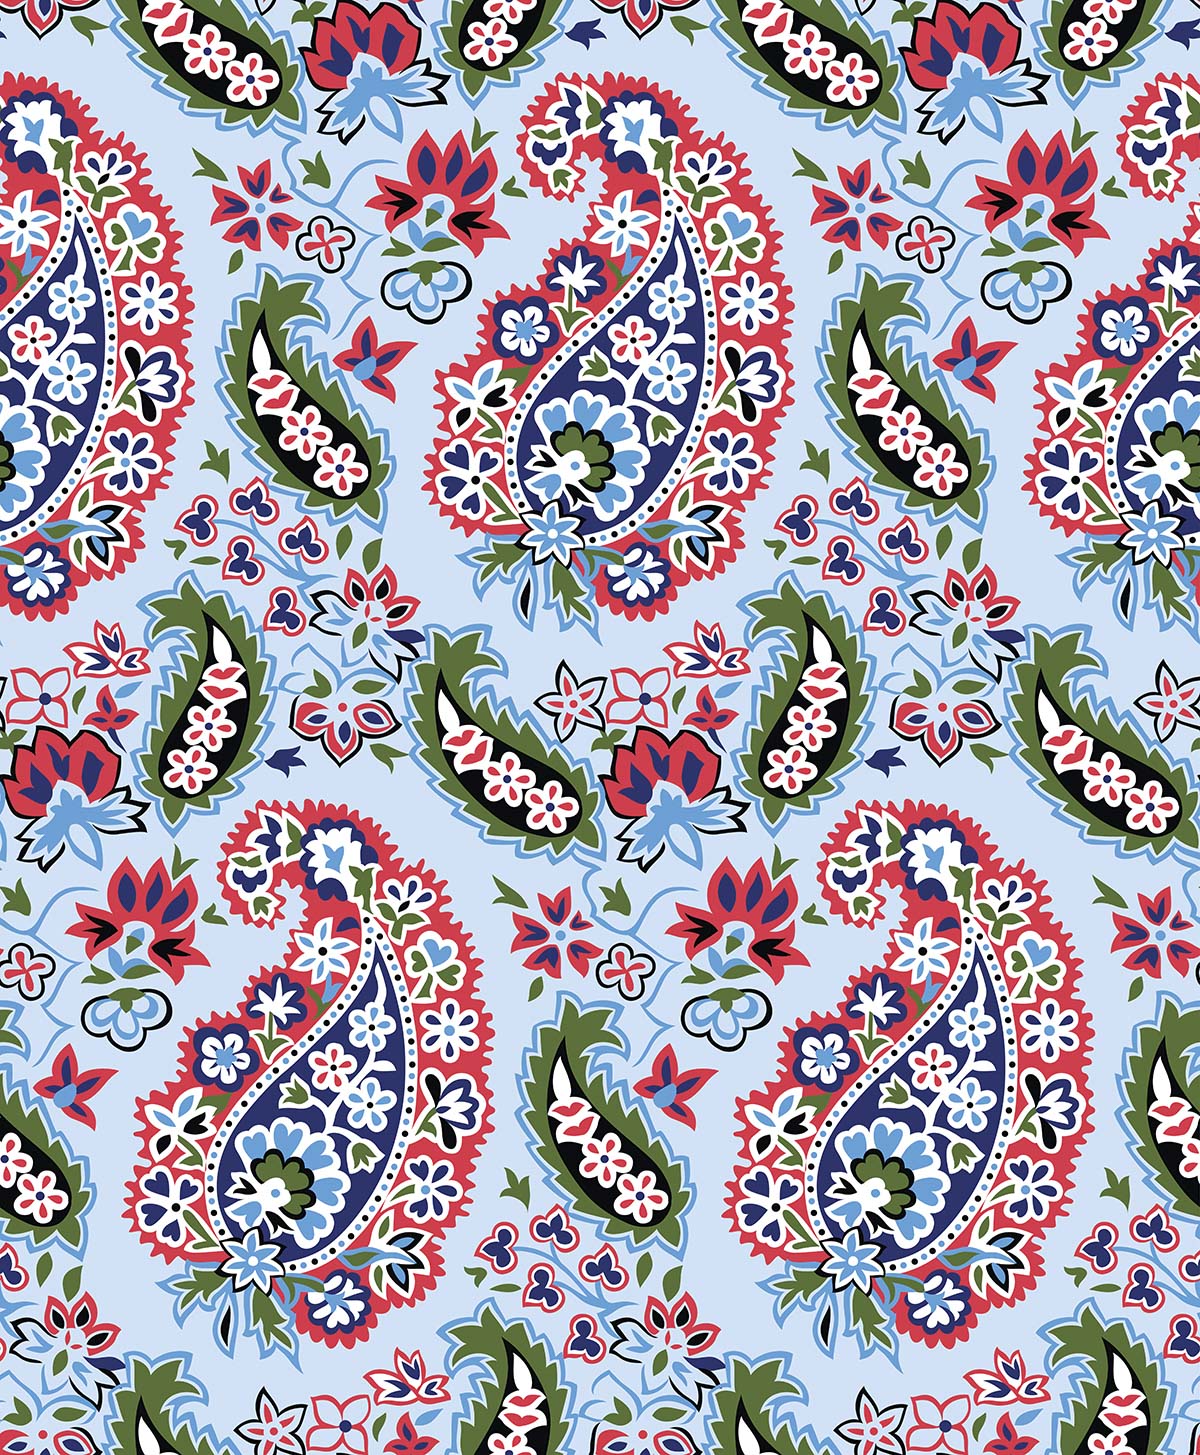 A colorful paisley pattern on a blue background